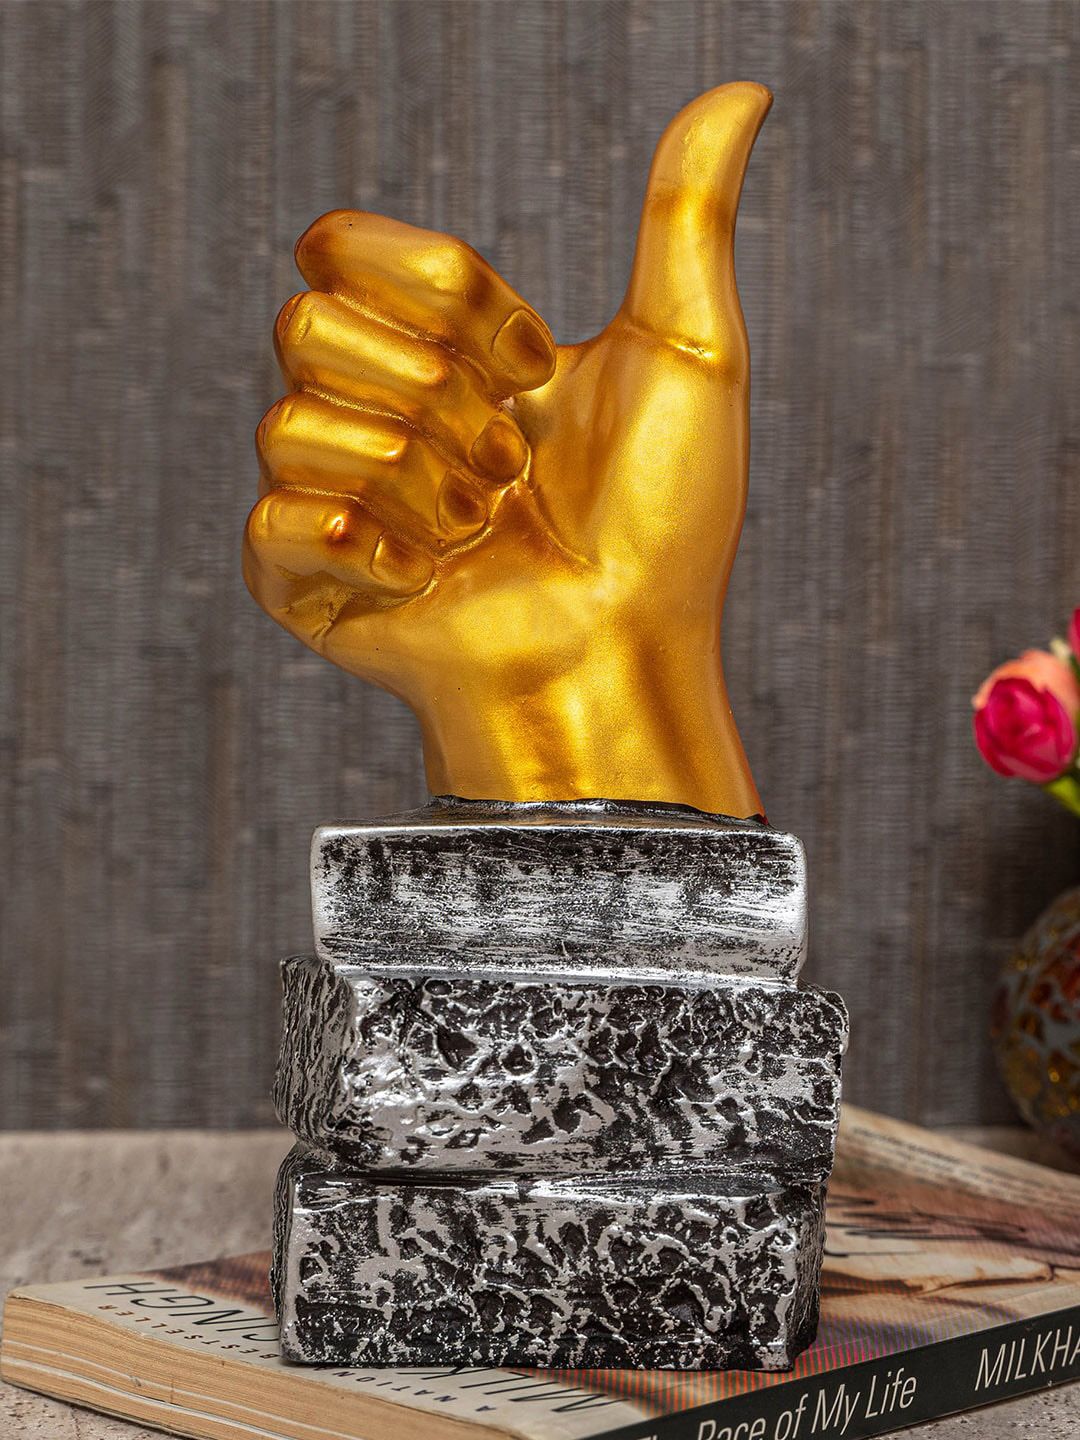 TIED RIBBONS Gold-Coloured & Black Thumbs Up Sign Statue Showpiece Price in India